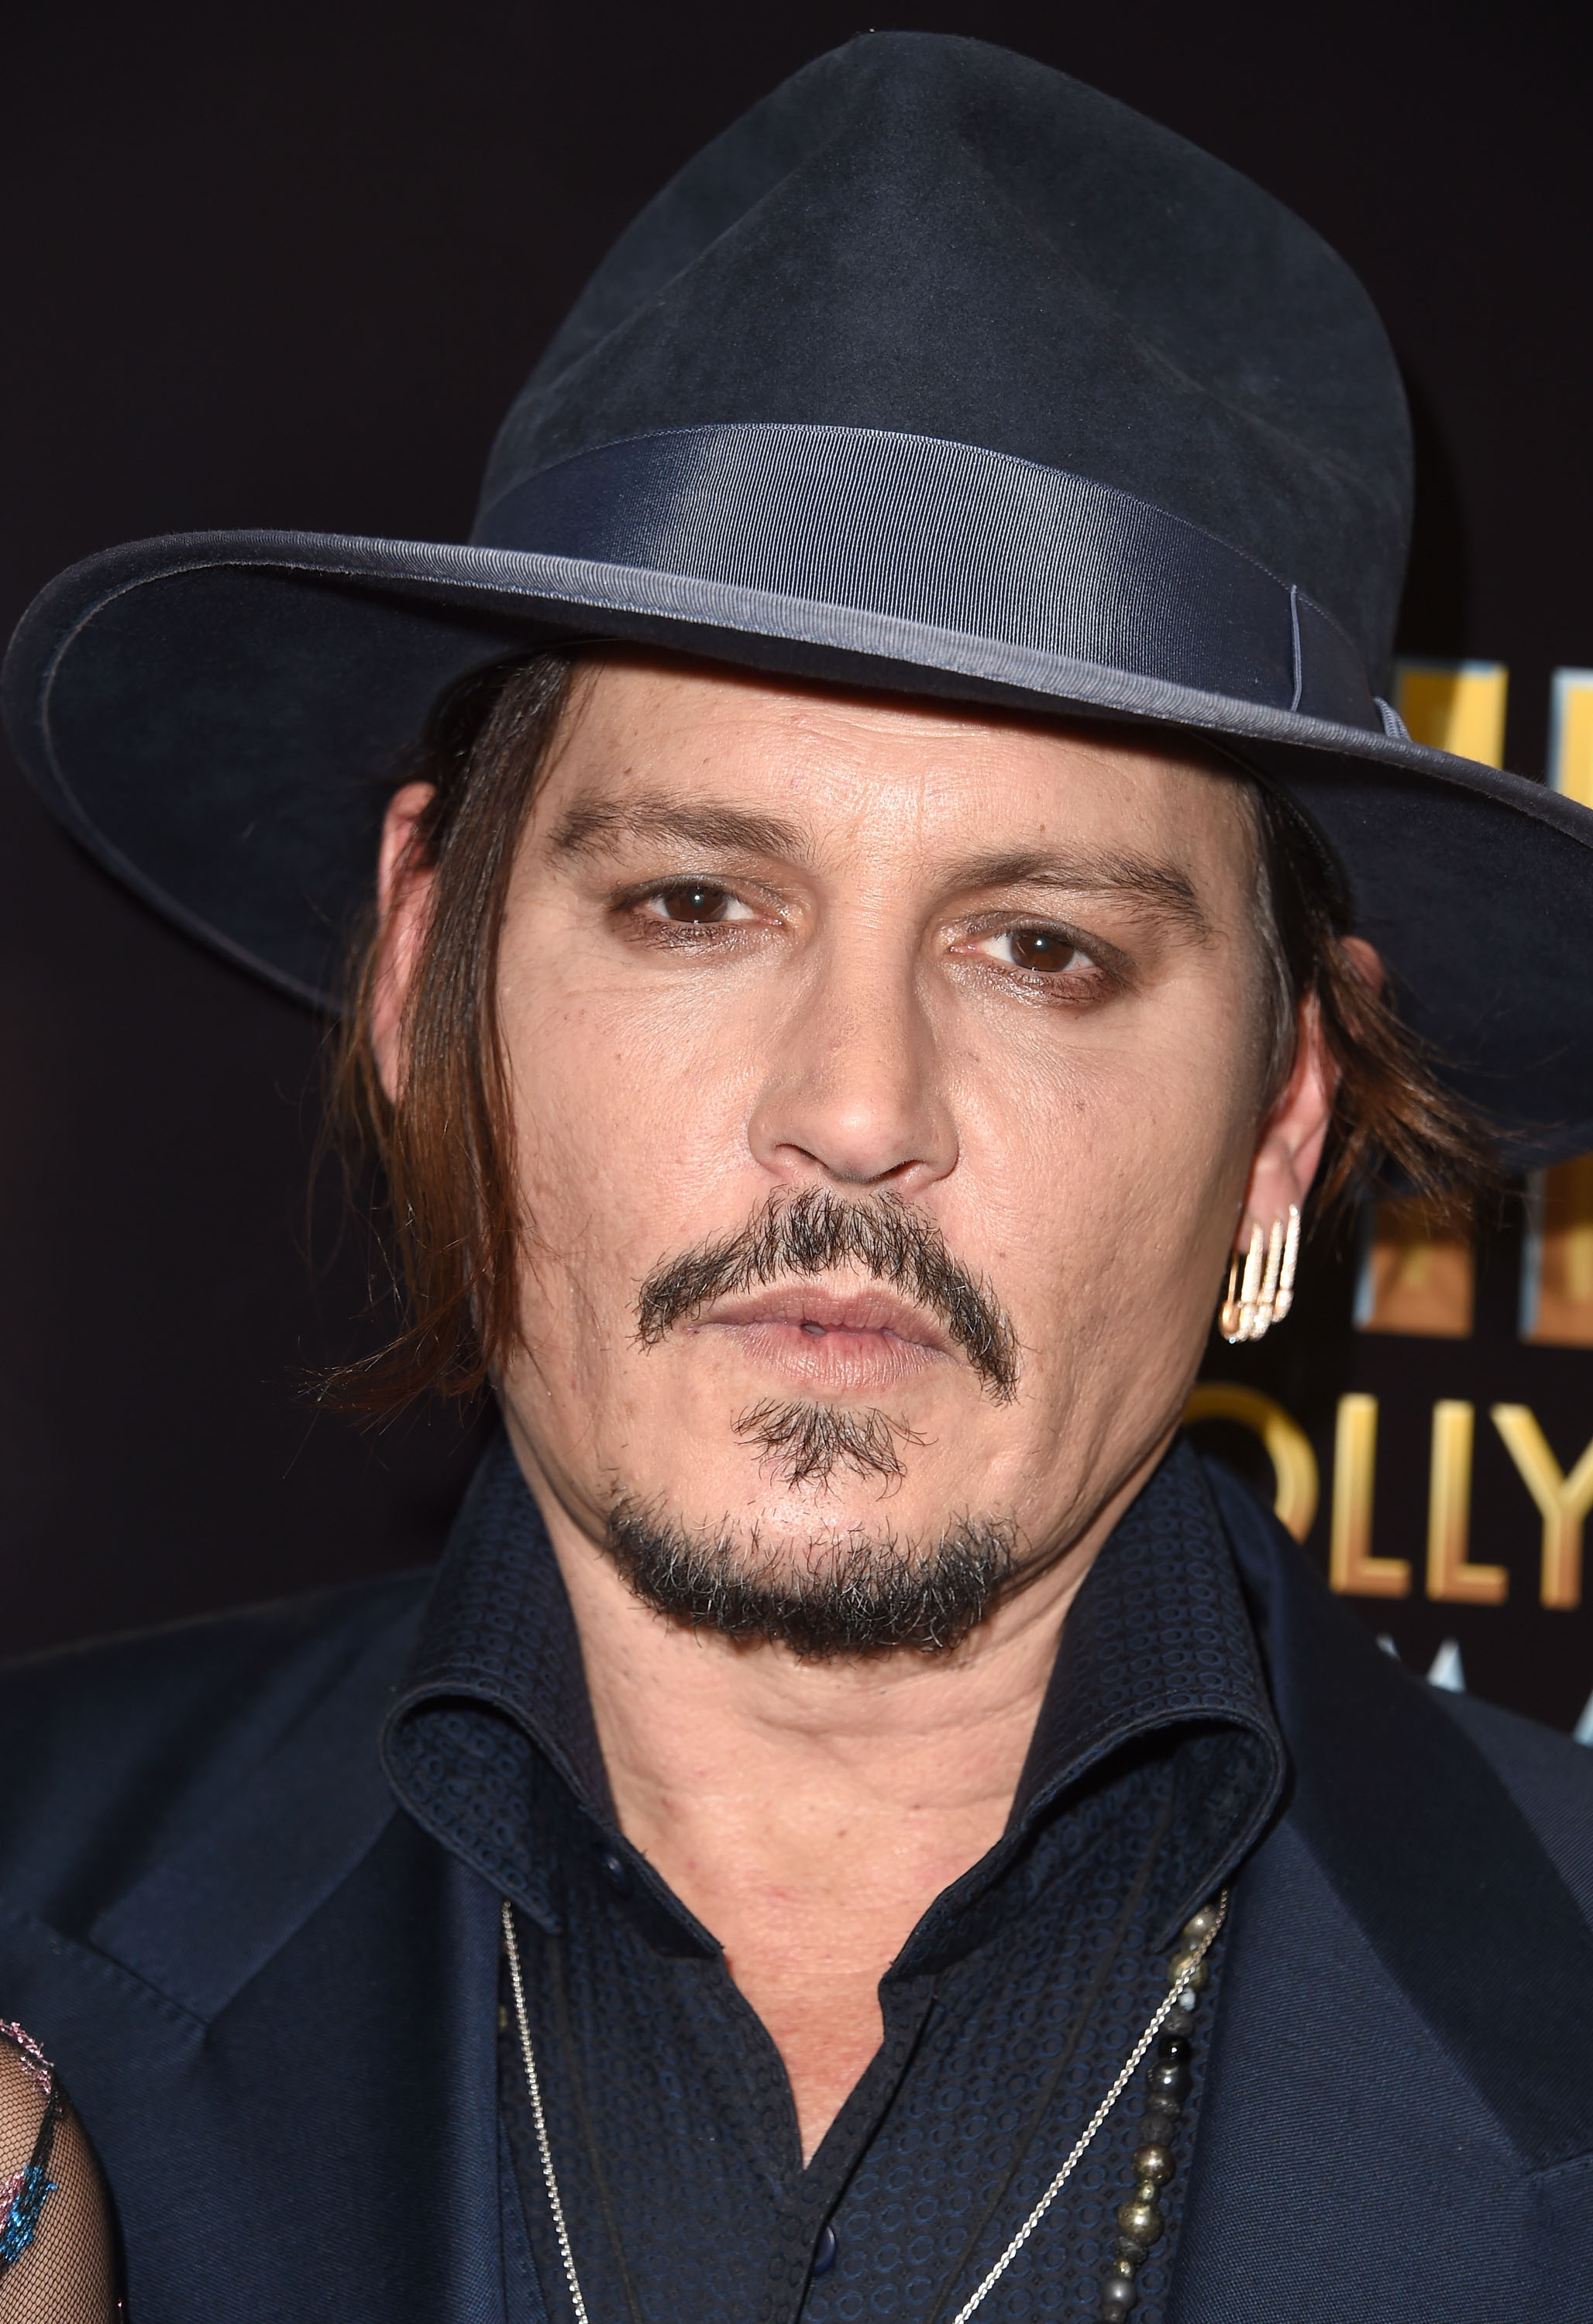 Johnny Depp at the 19th Annual Hollywood Film Awards in Beverly Hills on Nov. 1, 2015.